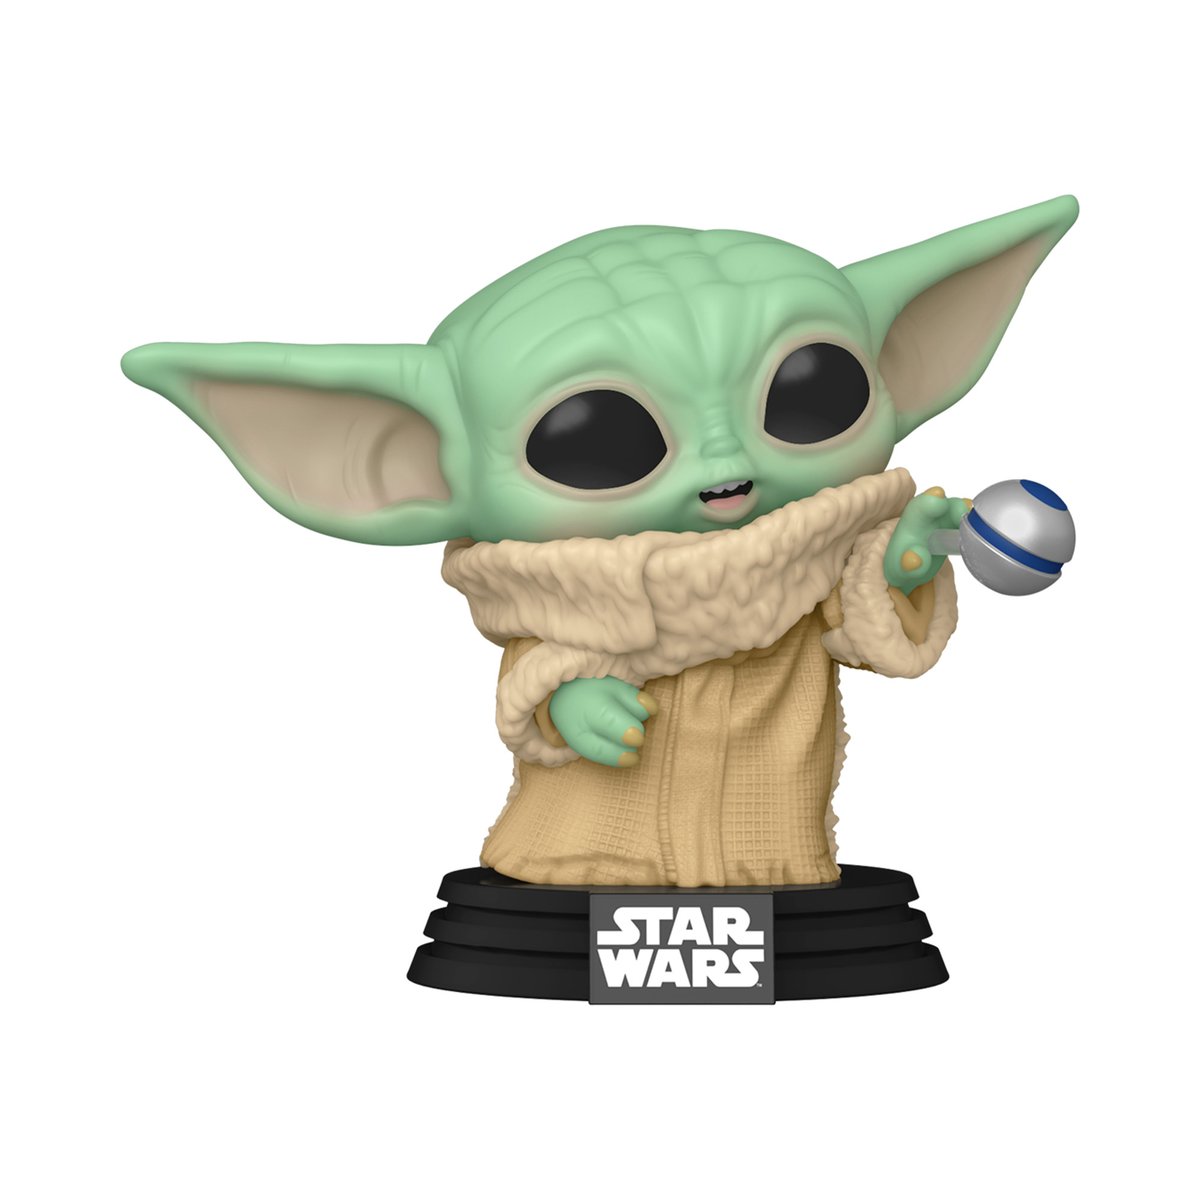 Excited for the Funko Pop!-inspired balloon featuring Grogu™ to fly at this year’s Macy’s Thanksgiving Day Parade®? RT and follow @OriginalFunko for the chance to WIN this exclusive Grogu™ Pop! #MacysParade #MacysBalloonFest #StarWars #Funko @Macys @starwars @themandalorian